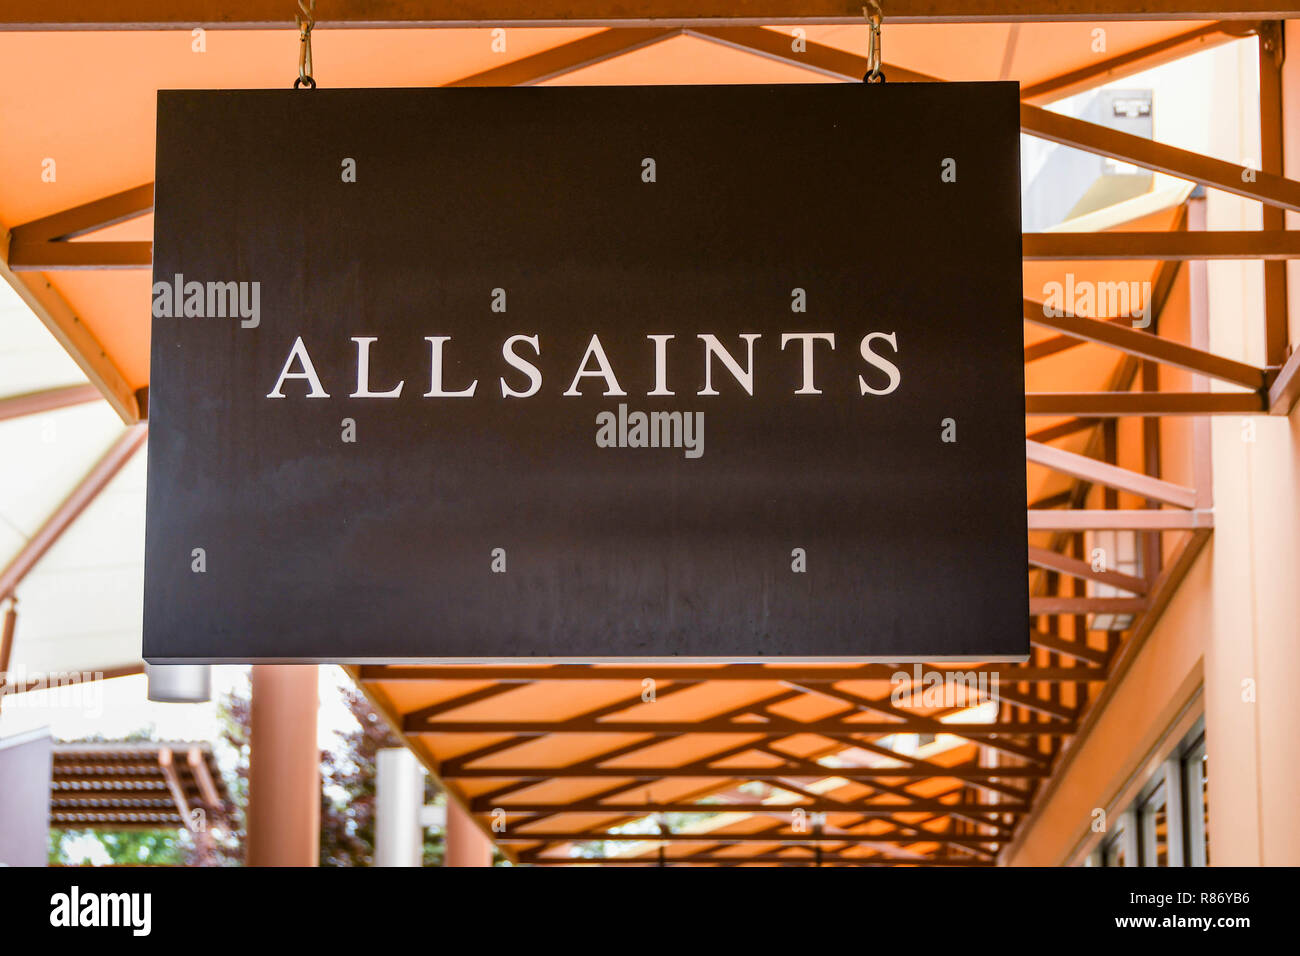 Allsaints Store High Resolution Stock Photography and Images - Alamy